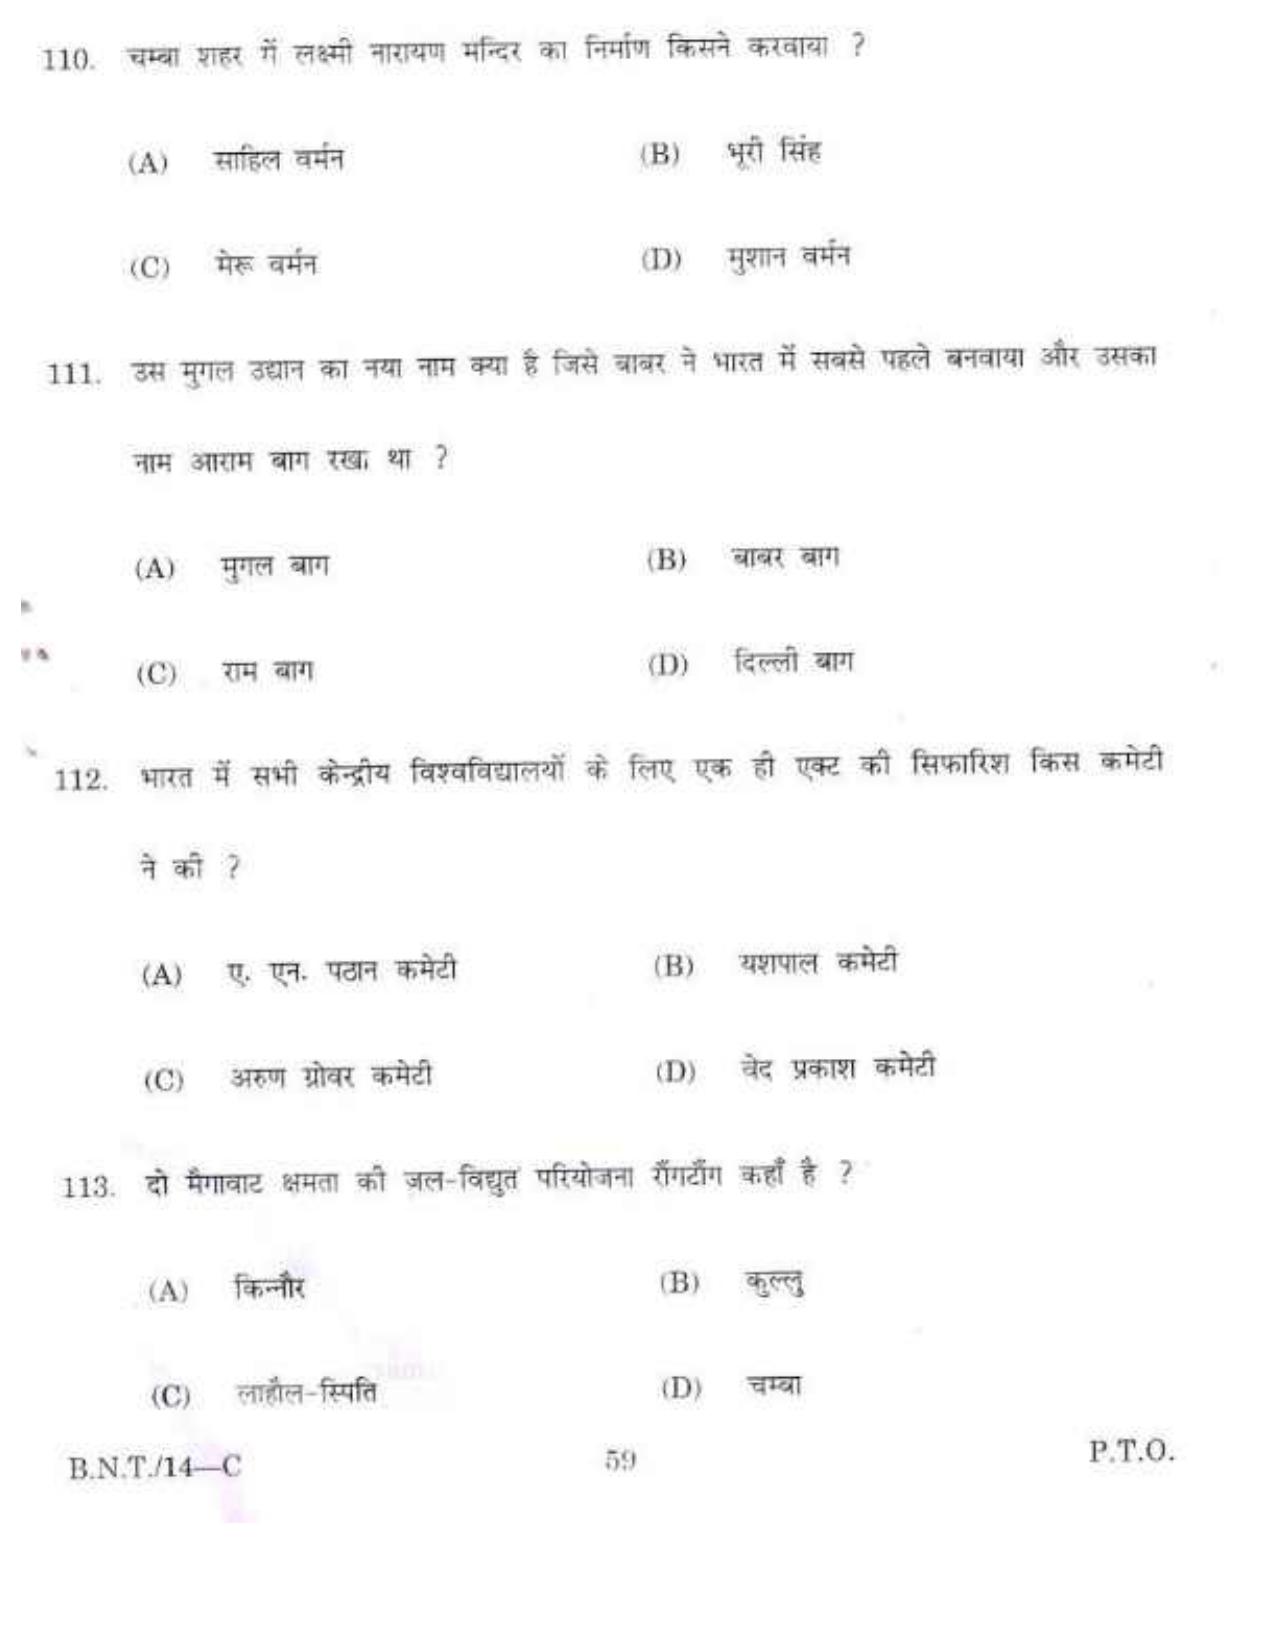 BSMFC Recovery Agent Old Question Papers for General Knowledge - Page 59